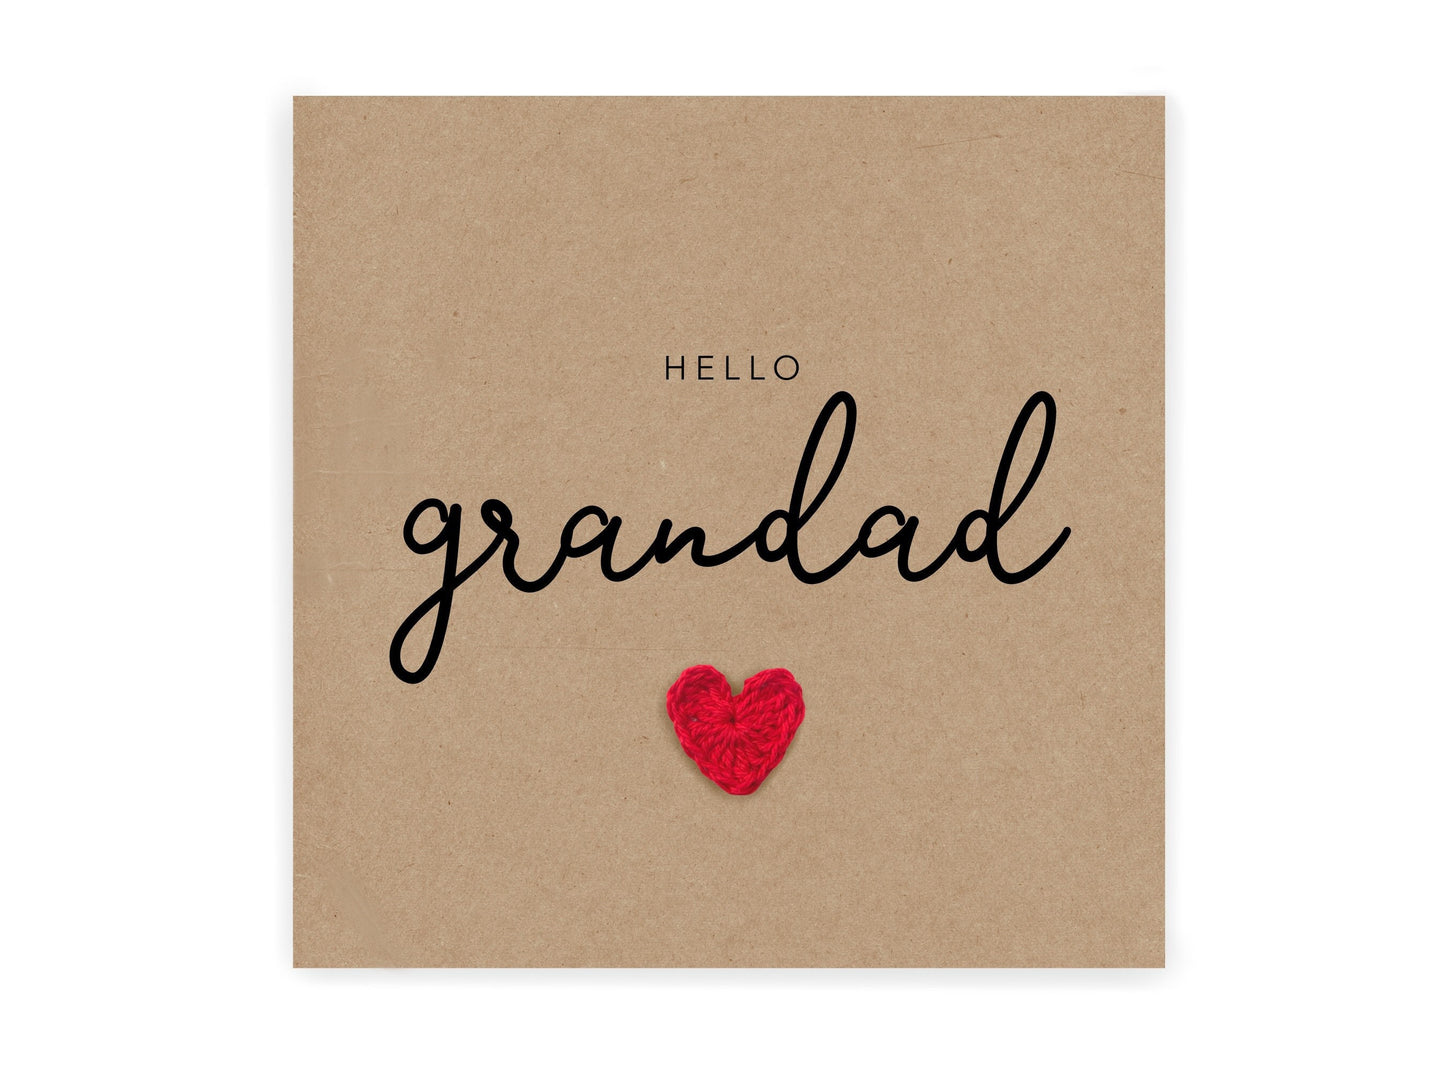 You're going to be a Grandad card, Pregnancy announcement, Grandad Dad to be, Baby Reveal, New Baby Pregnancy, Reveal, Send to Recipient